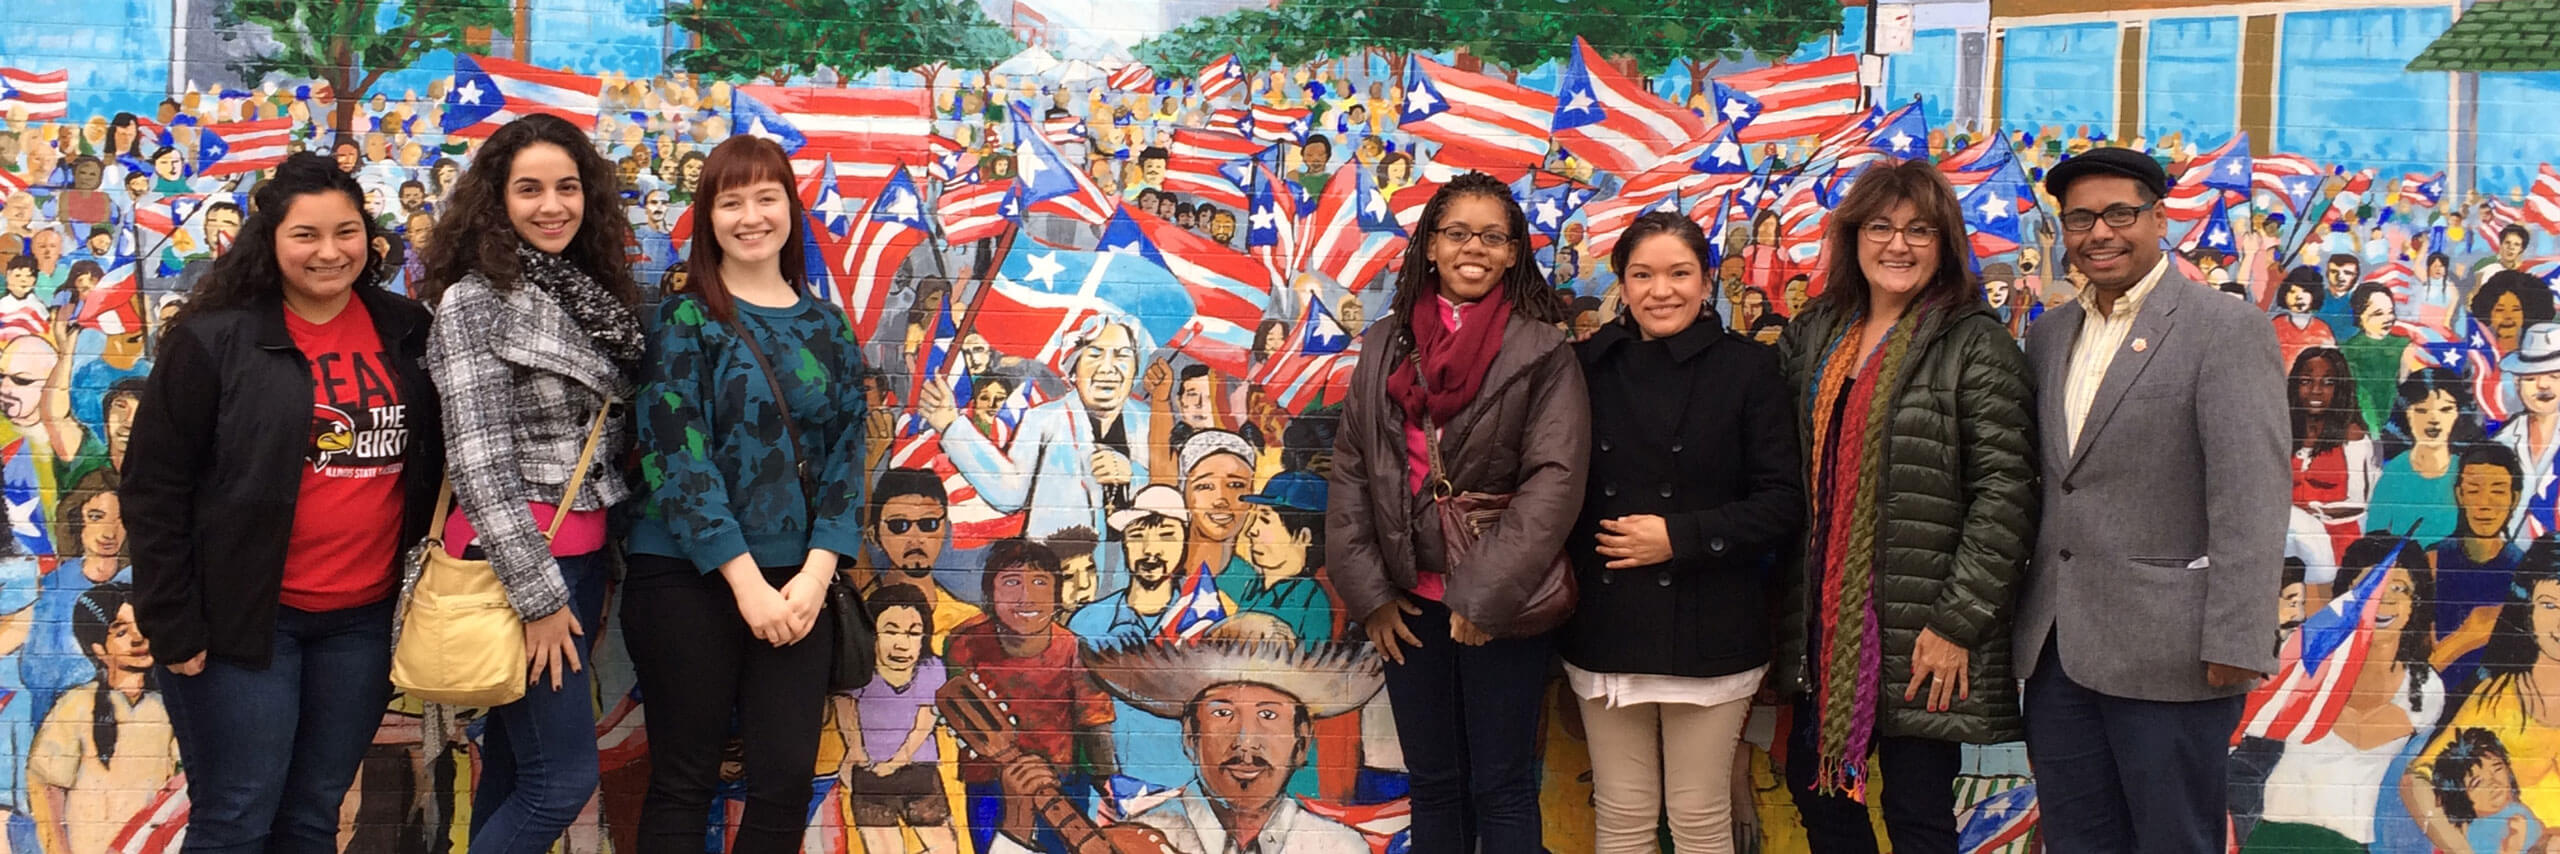 WGS students pose in front of a mural in Chicago.